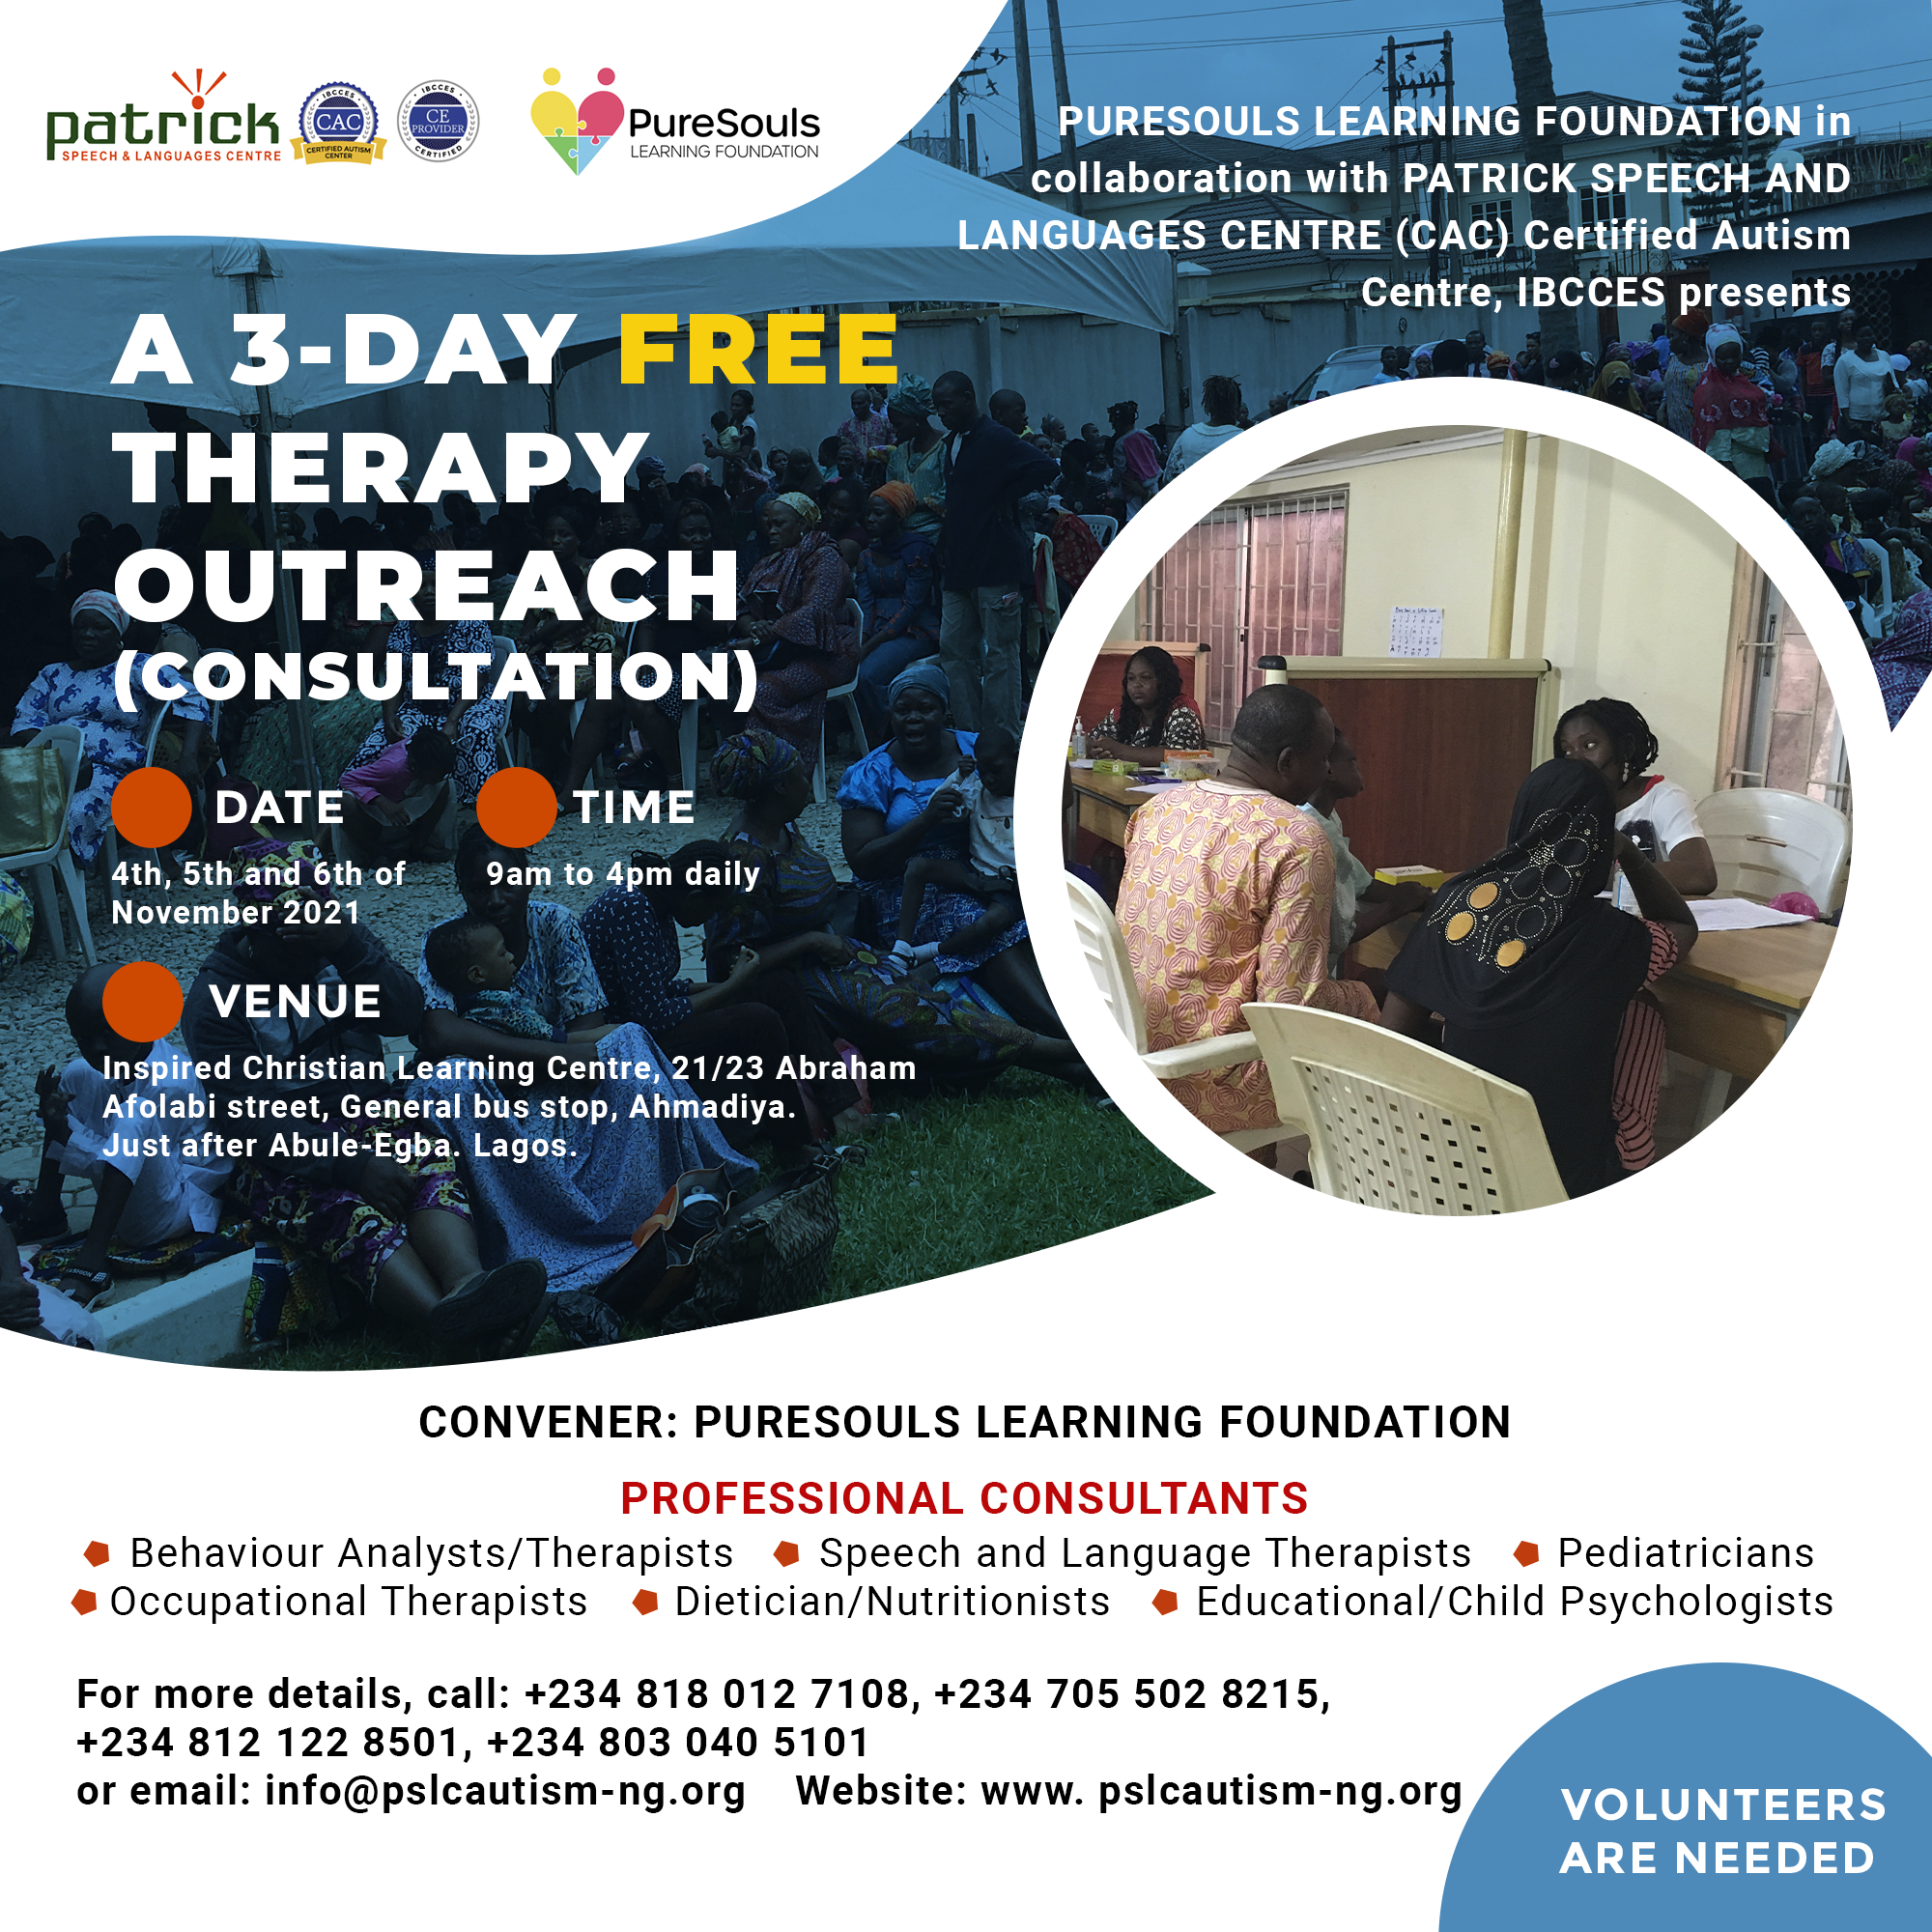 A 3-Day Free Therapy Outreach